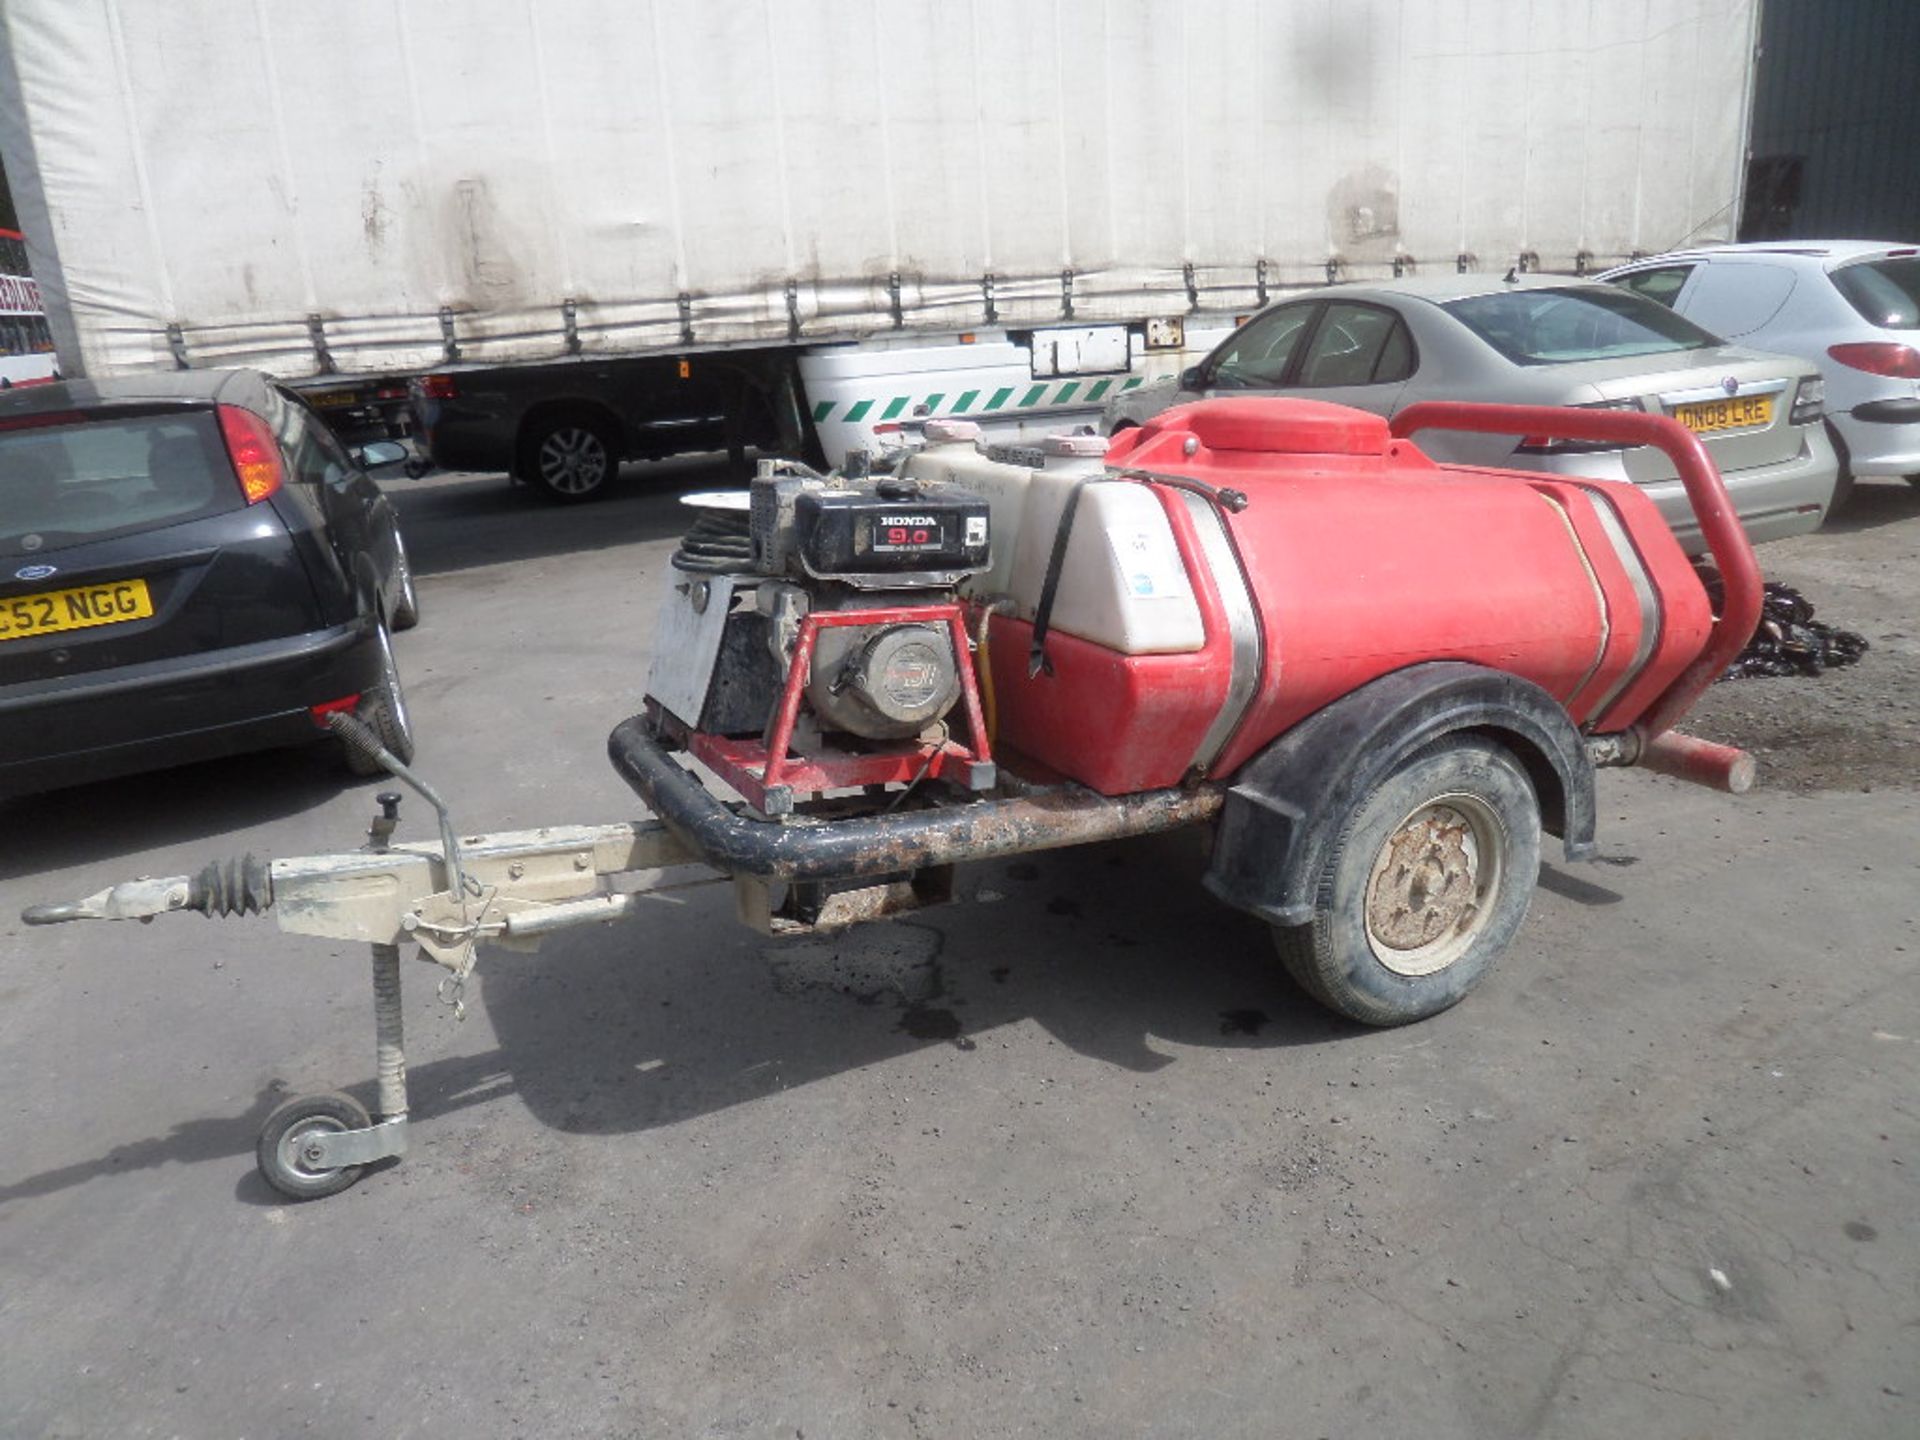 UNKNOWN  {026720} DIESEL PRESSURE WASHER AND BOWSER - TOWABLE Powered by Honda GD410 engine - starts